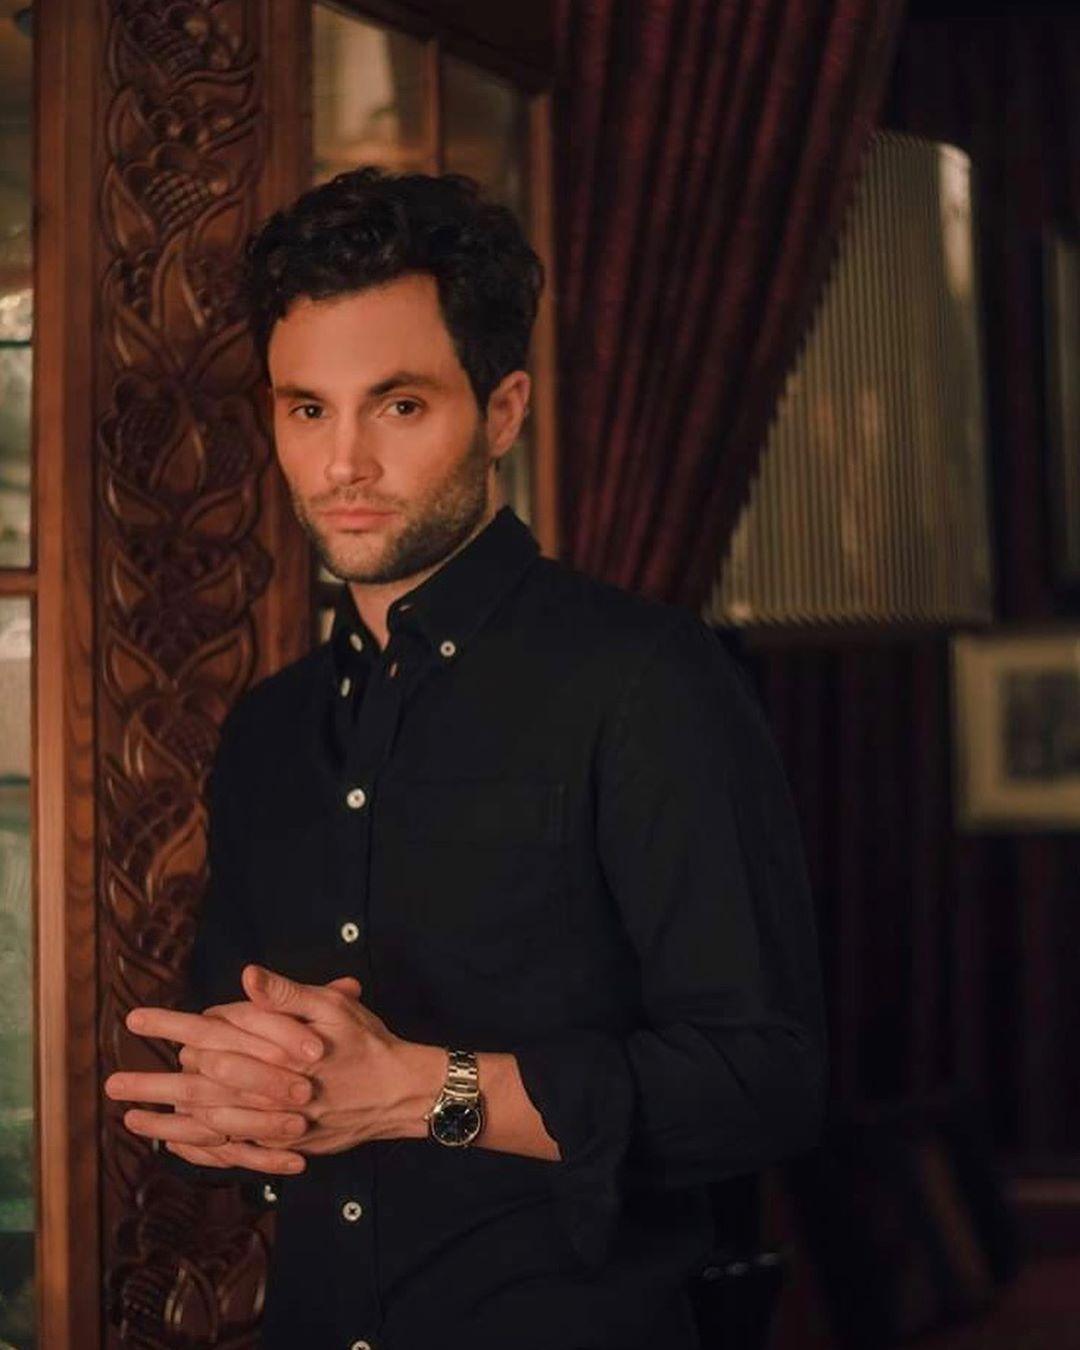 More photo of Penn for #pennbadgley